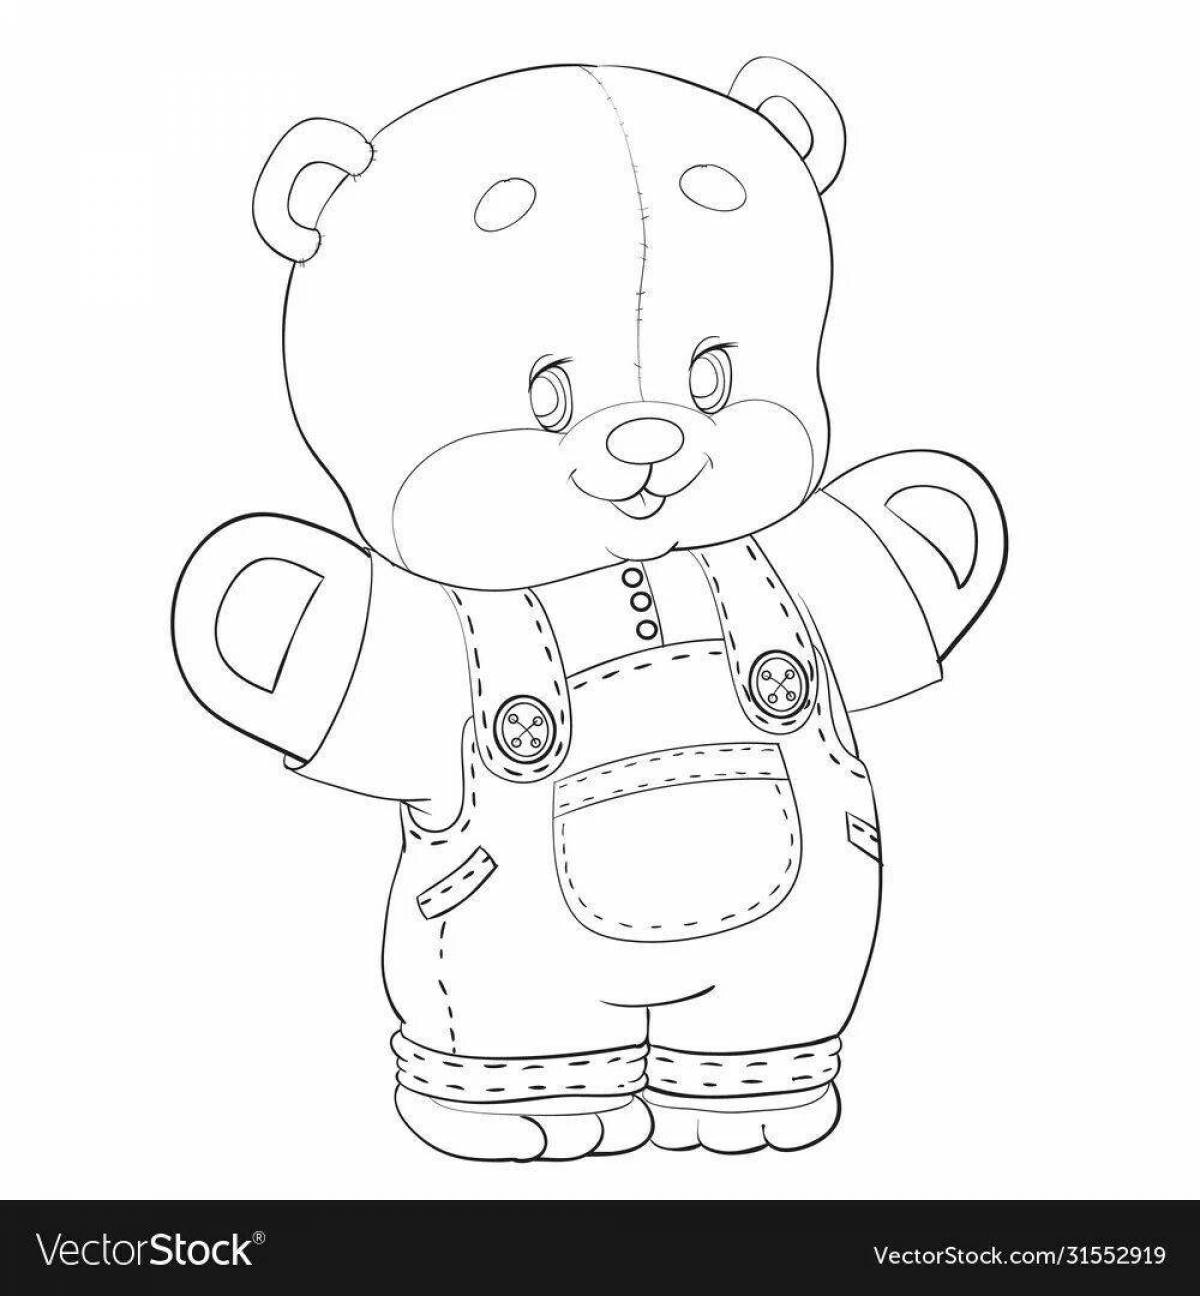 Colorful pants for teddy bear